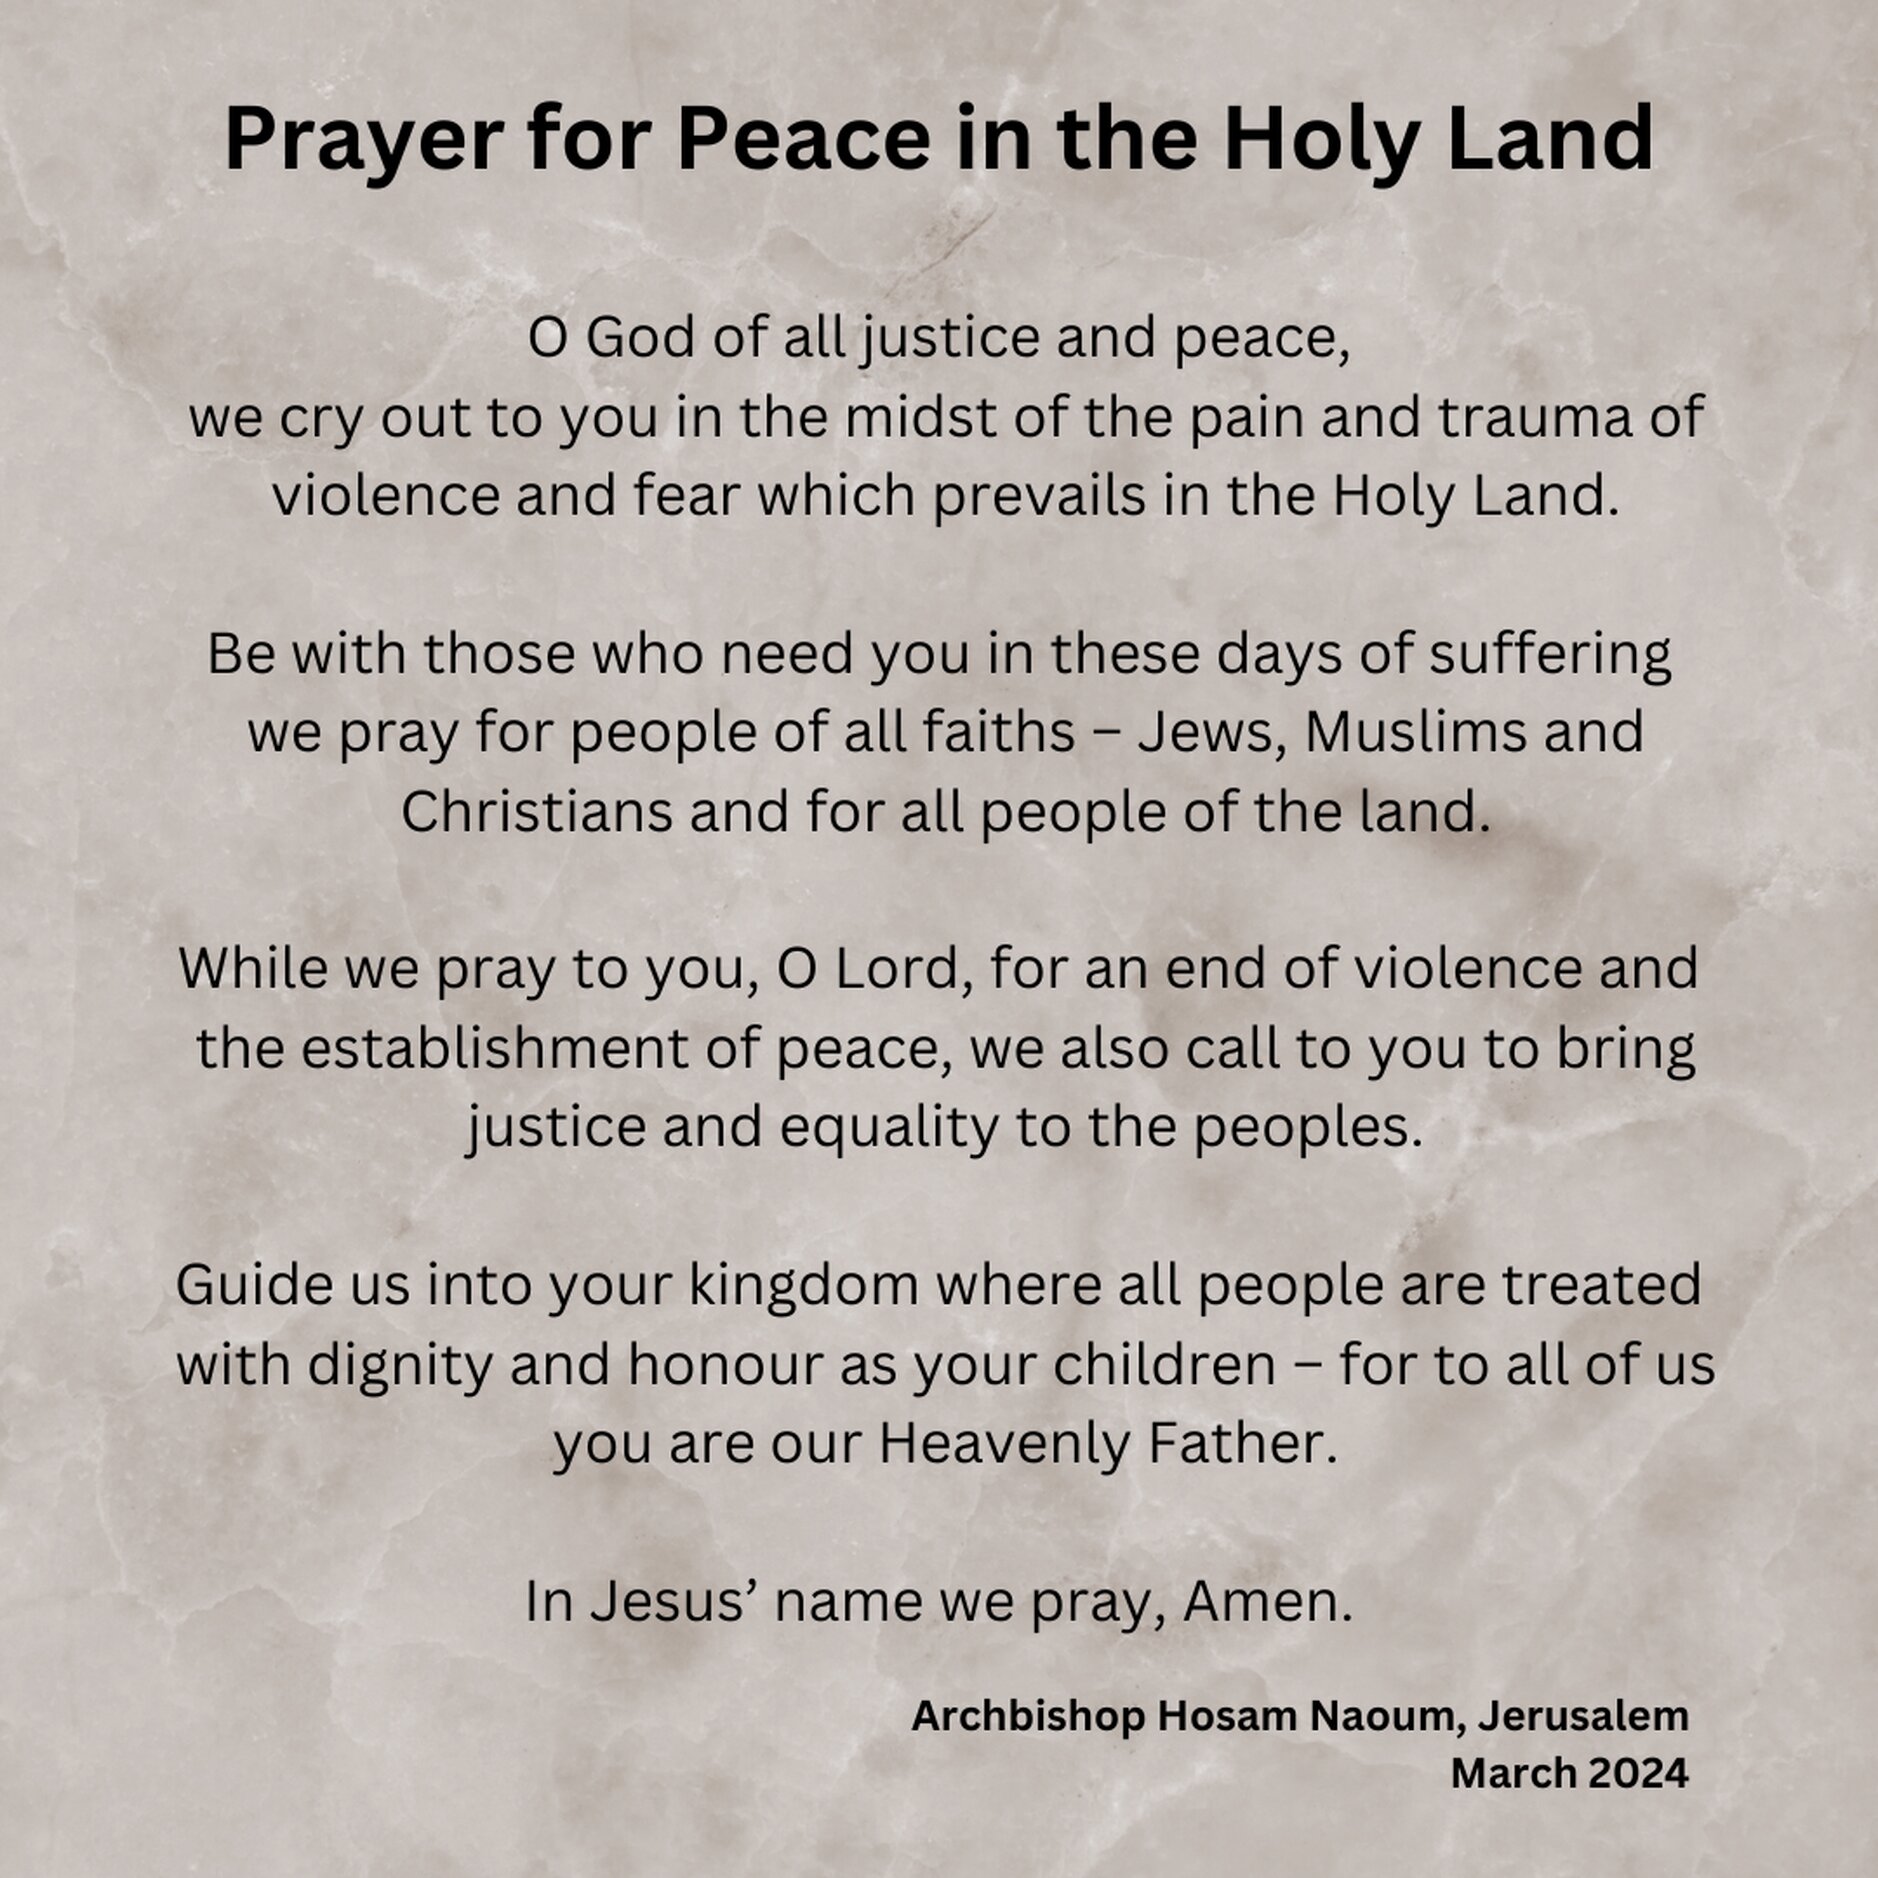 Prayer for Peace in the Holy Land: by the Archbishop of Jerusalem - Archbishop Hosam Naoum, the Anglican Archbishop in Jerusalem, has written a prayer for peace in the Holy Land. He has shared it with bishops across the Anglican Communion.

Archbishop Michael Jackson is encouraging all the people of the United Dioceses to use the prayer personally and has asked clergy to use it in church services from Palm Sunday through to Easter Day. 

He says: “Palm Sunday marks the transition on the part of Jesus Christ from the desert to the city of Jerusalem. We travel with him on this journey of faith, in humility and suffering”.